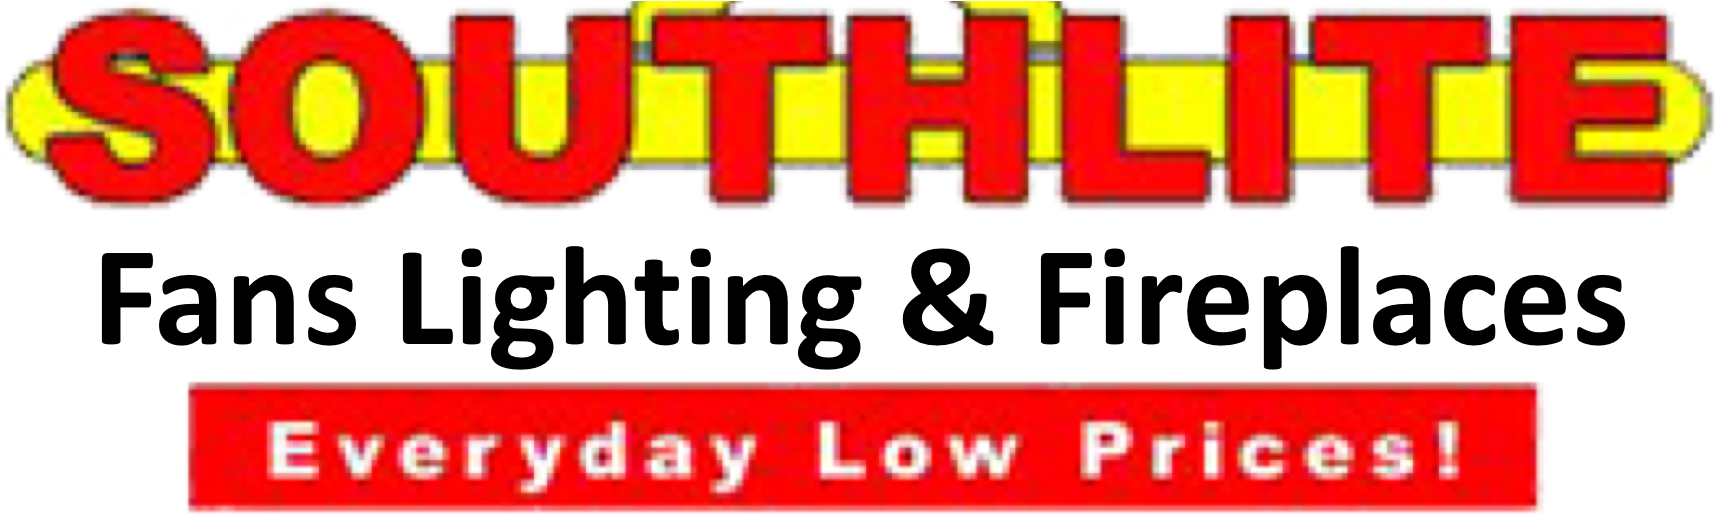 Southlite Fans Lighting & Fireplaces